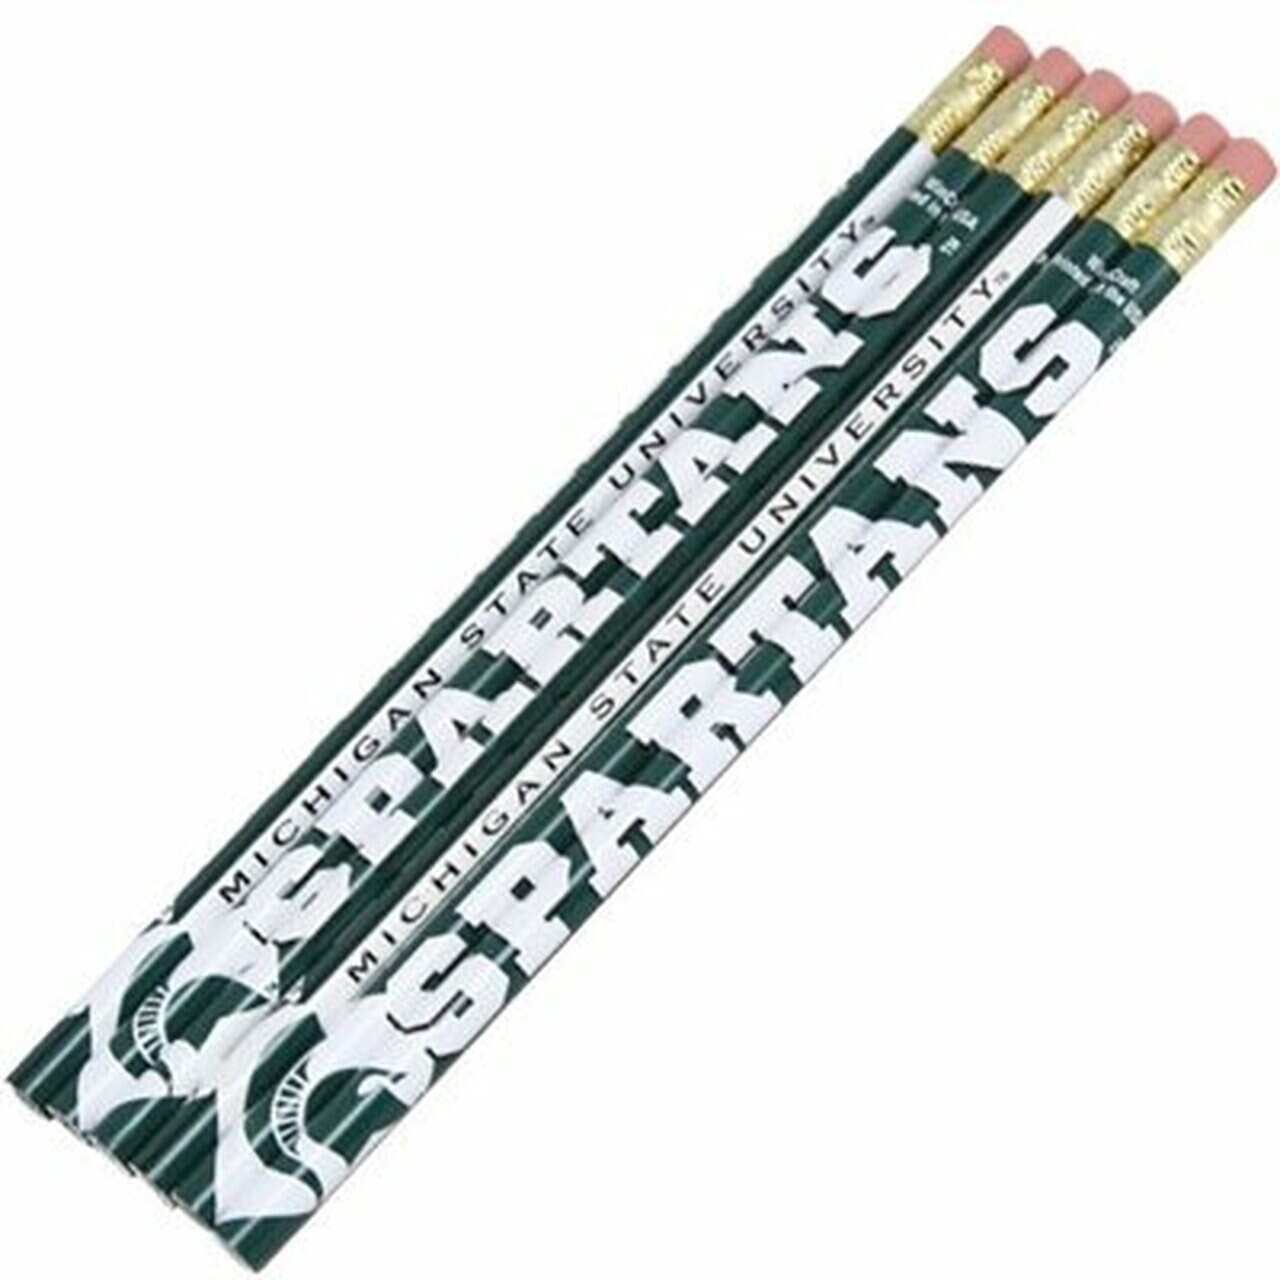 Michigan State Spartans 6 Pack Pencil by Wincraft